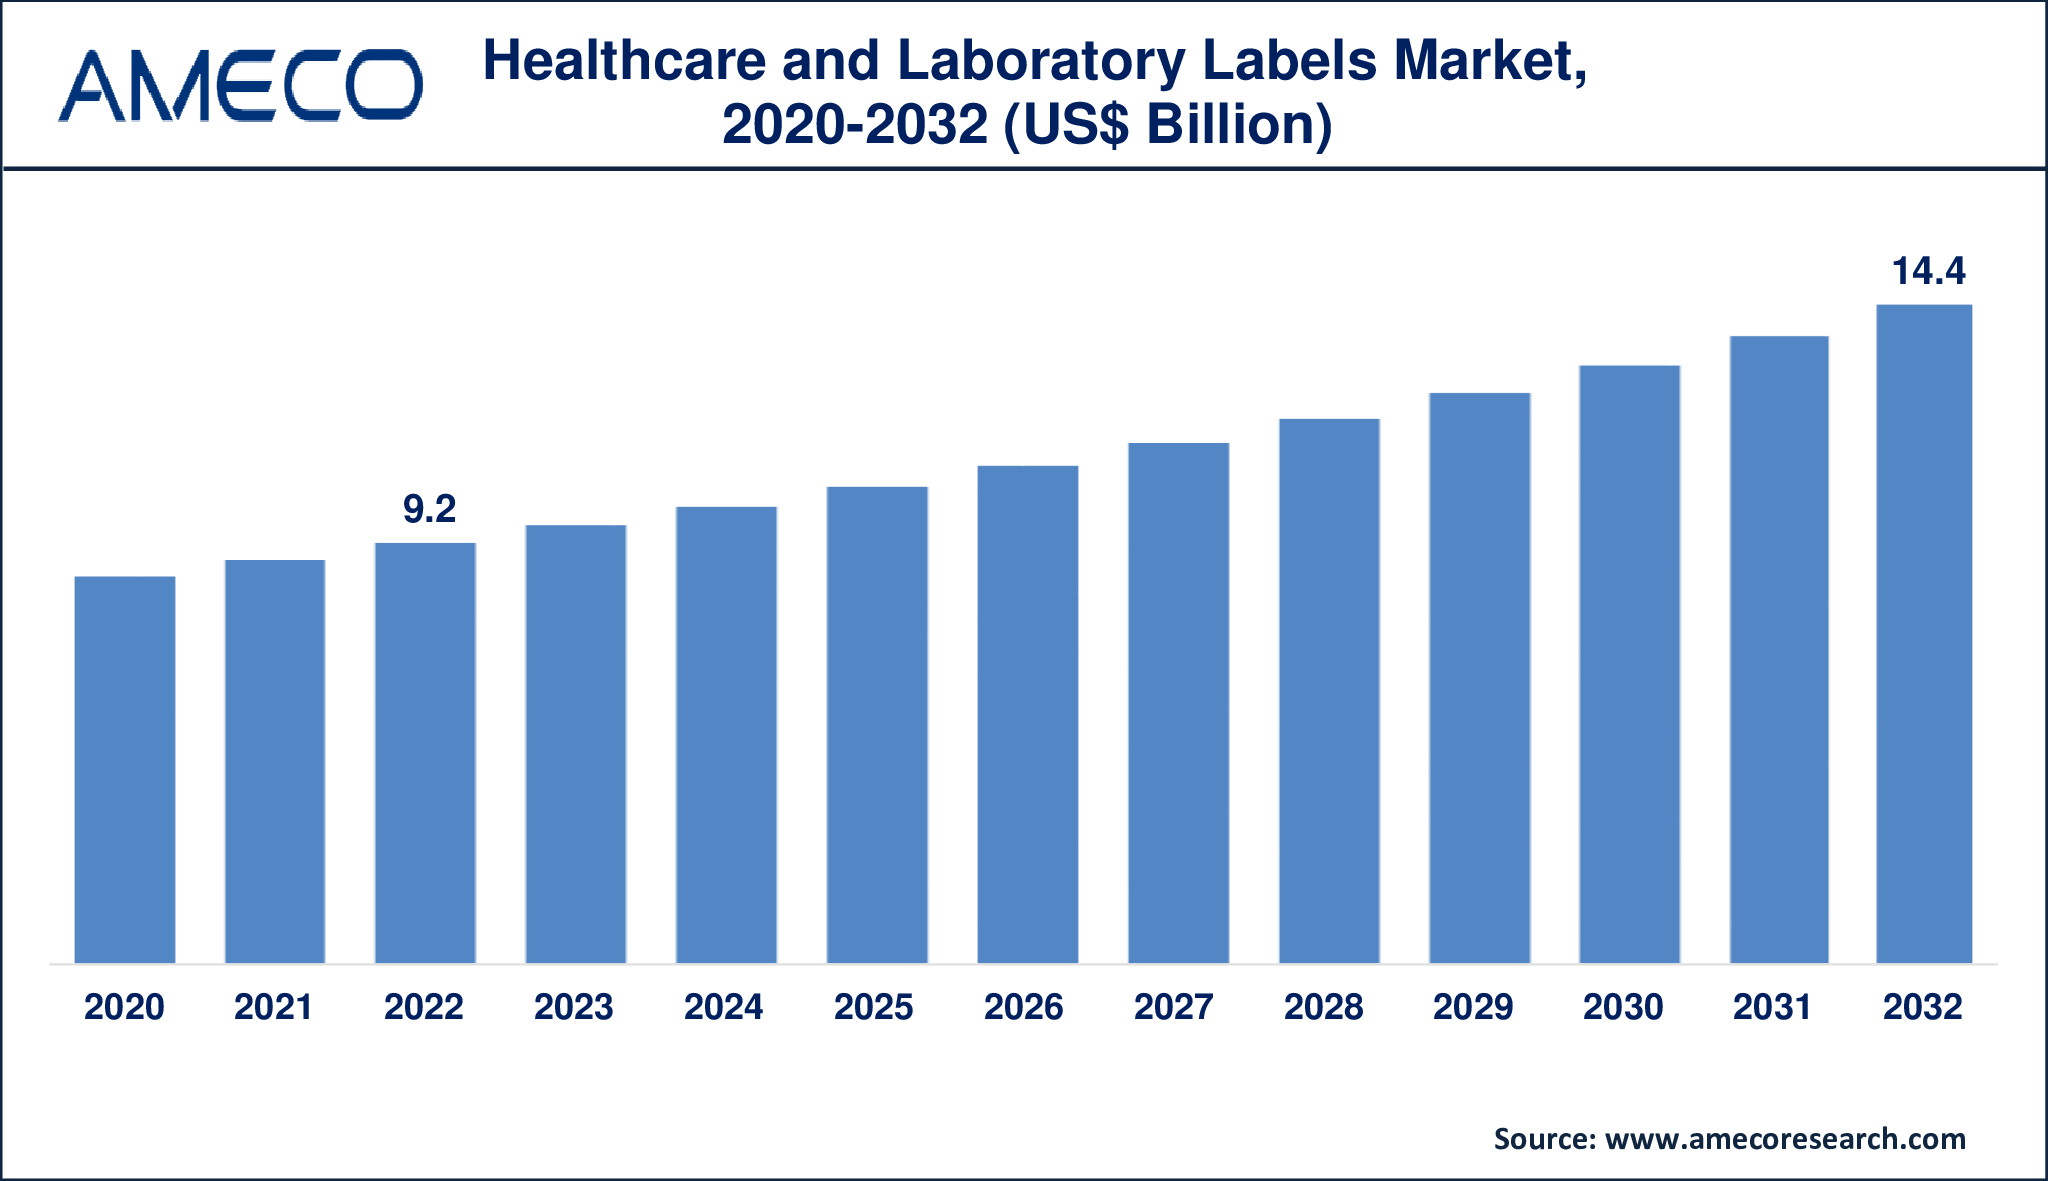 Healthcare and Laboratory Labels Market Dynamics